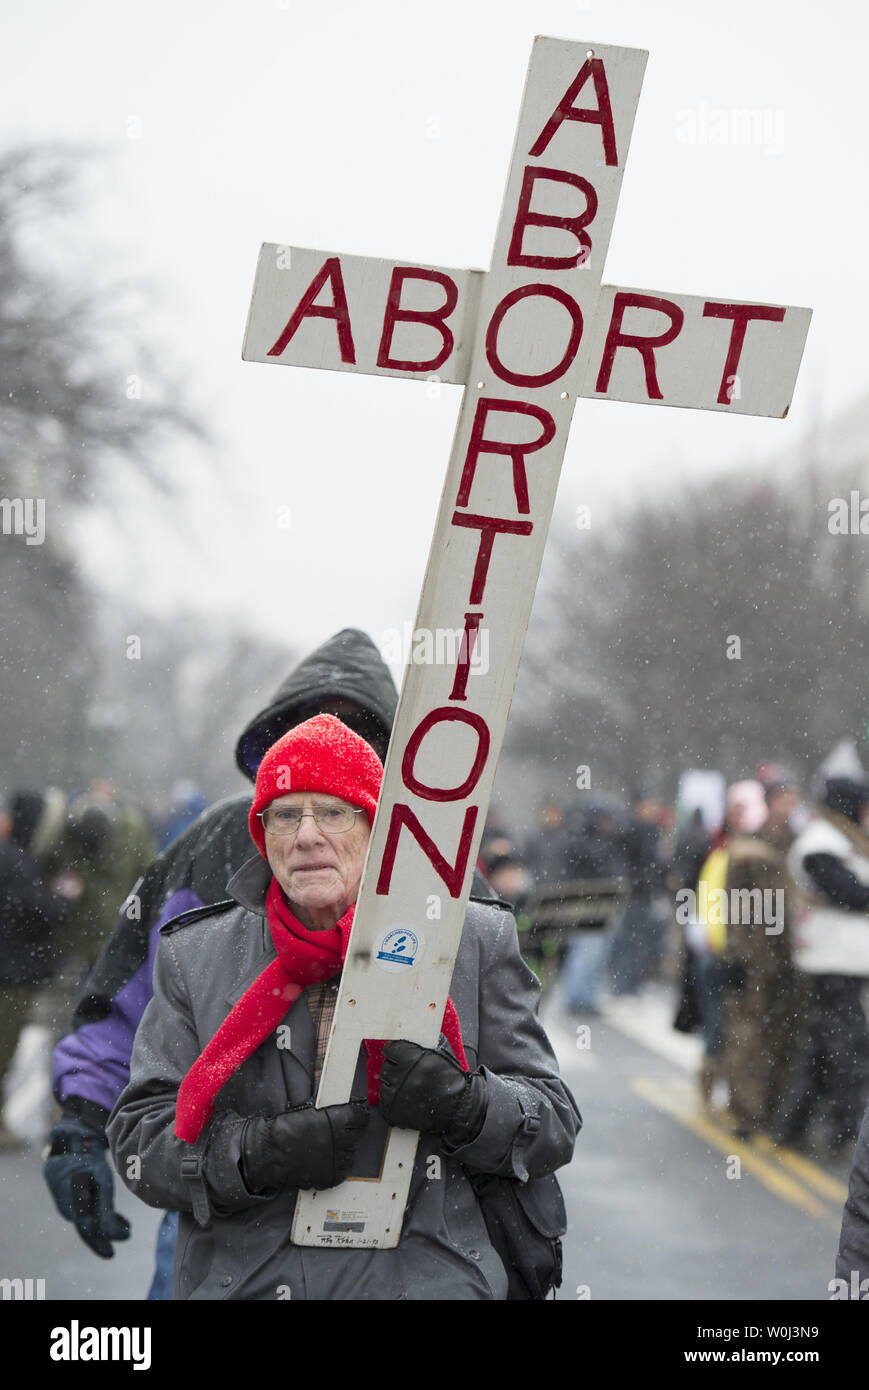 Activists march in the 43rd March for Life in Washington, DC on January 22, 2016. Activists from across the nation participated in the annual pro-life rally protesting abortion and the 1973 Roe v. Wade Supreme Court decision legalizing abortion.  Photo by Molly Riley/UPI Stock Photo